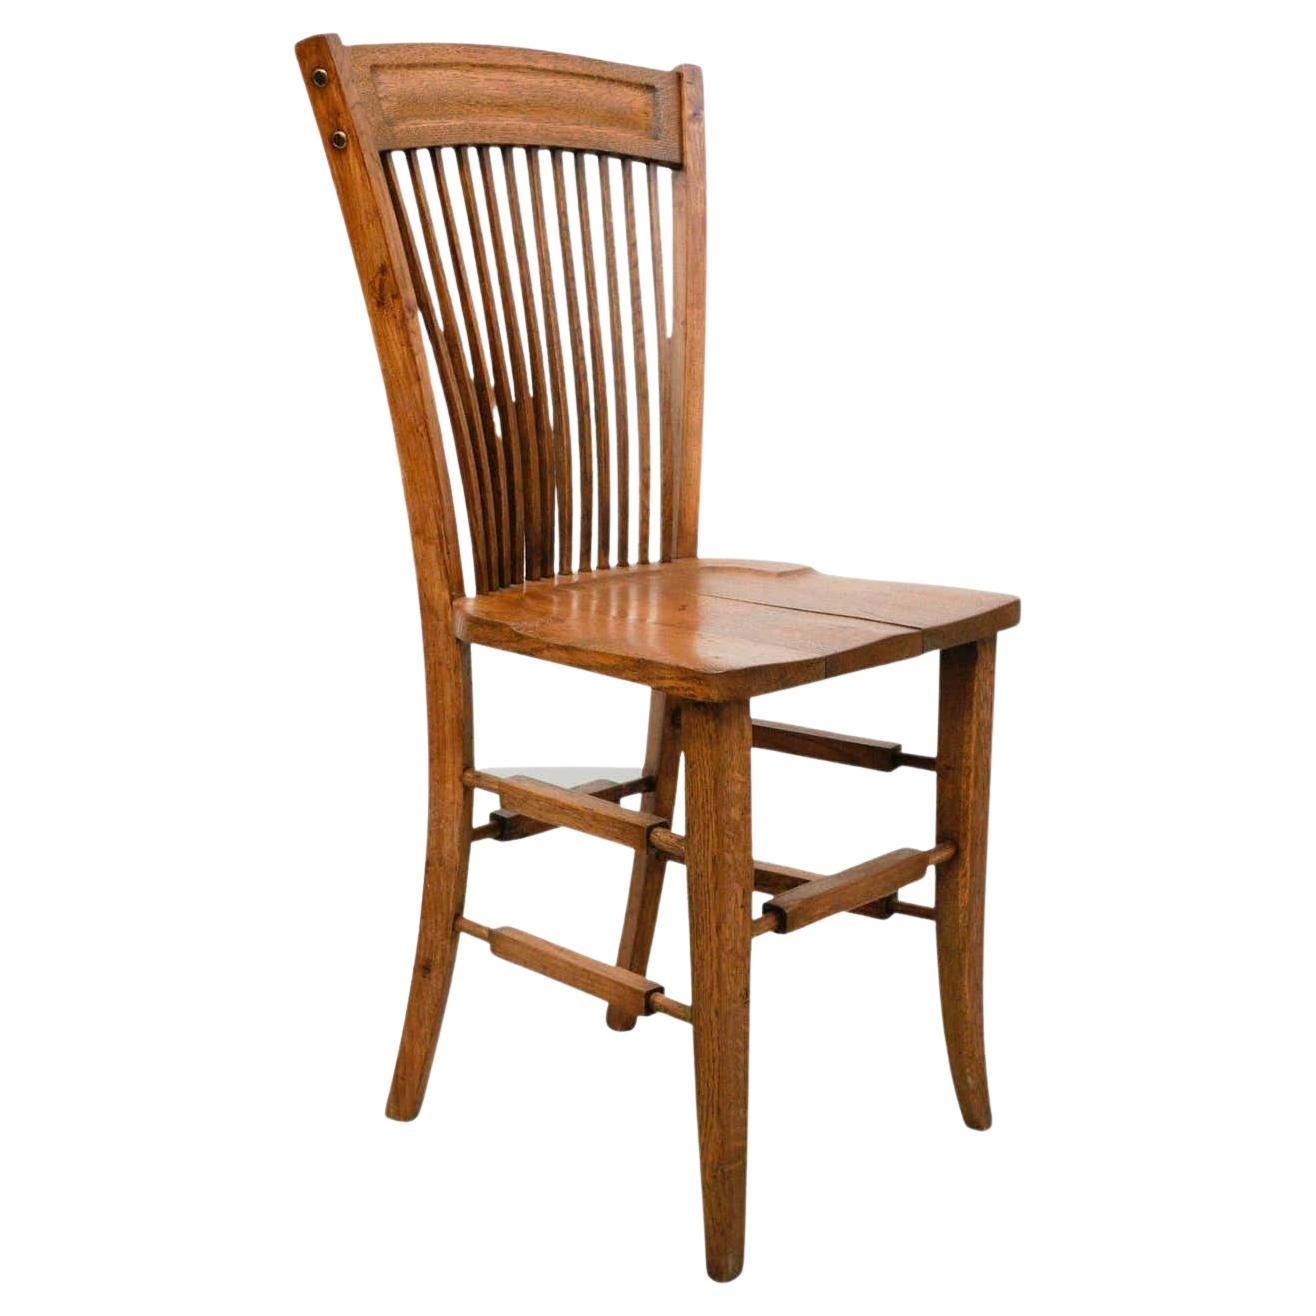 Early 20th Century, Traditional Wood Chair